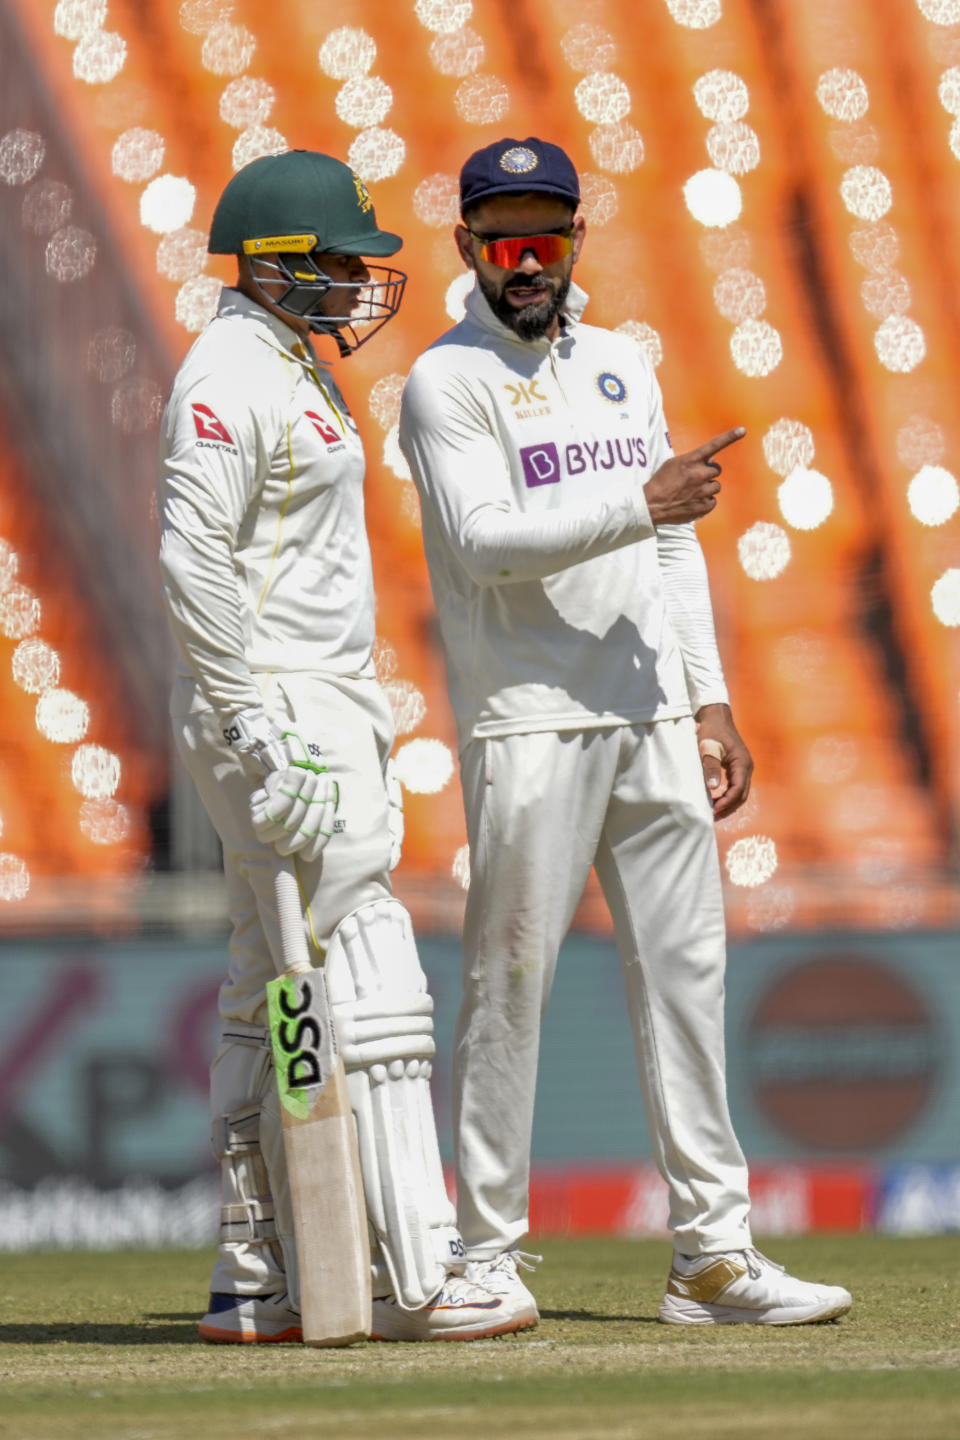 India's Virat Kohli, right, chat with Australia's Usman Khawaja during the second day of the fourth cricket test match between India and Australia in Ahmedabad, India, Friday, March 10, 2023. (AP Photo/Ajit Solanki)